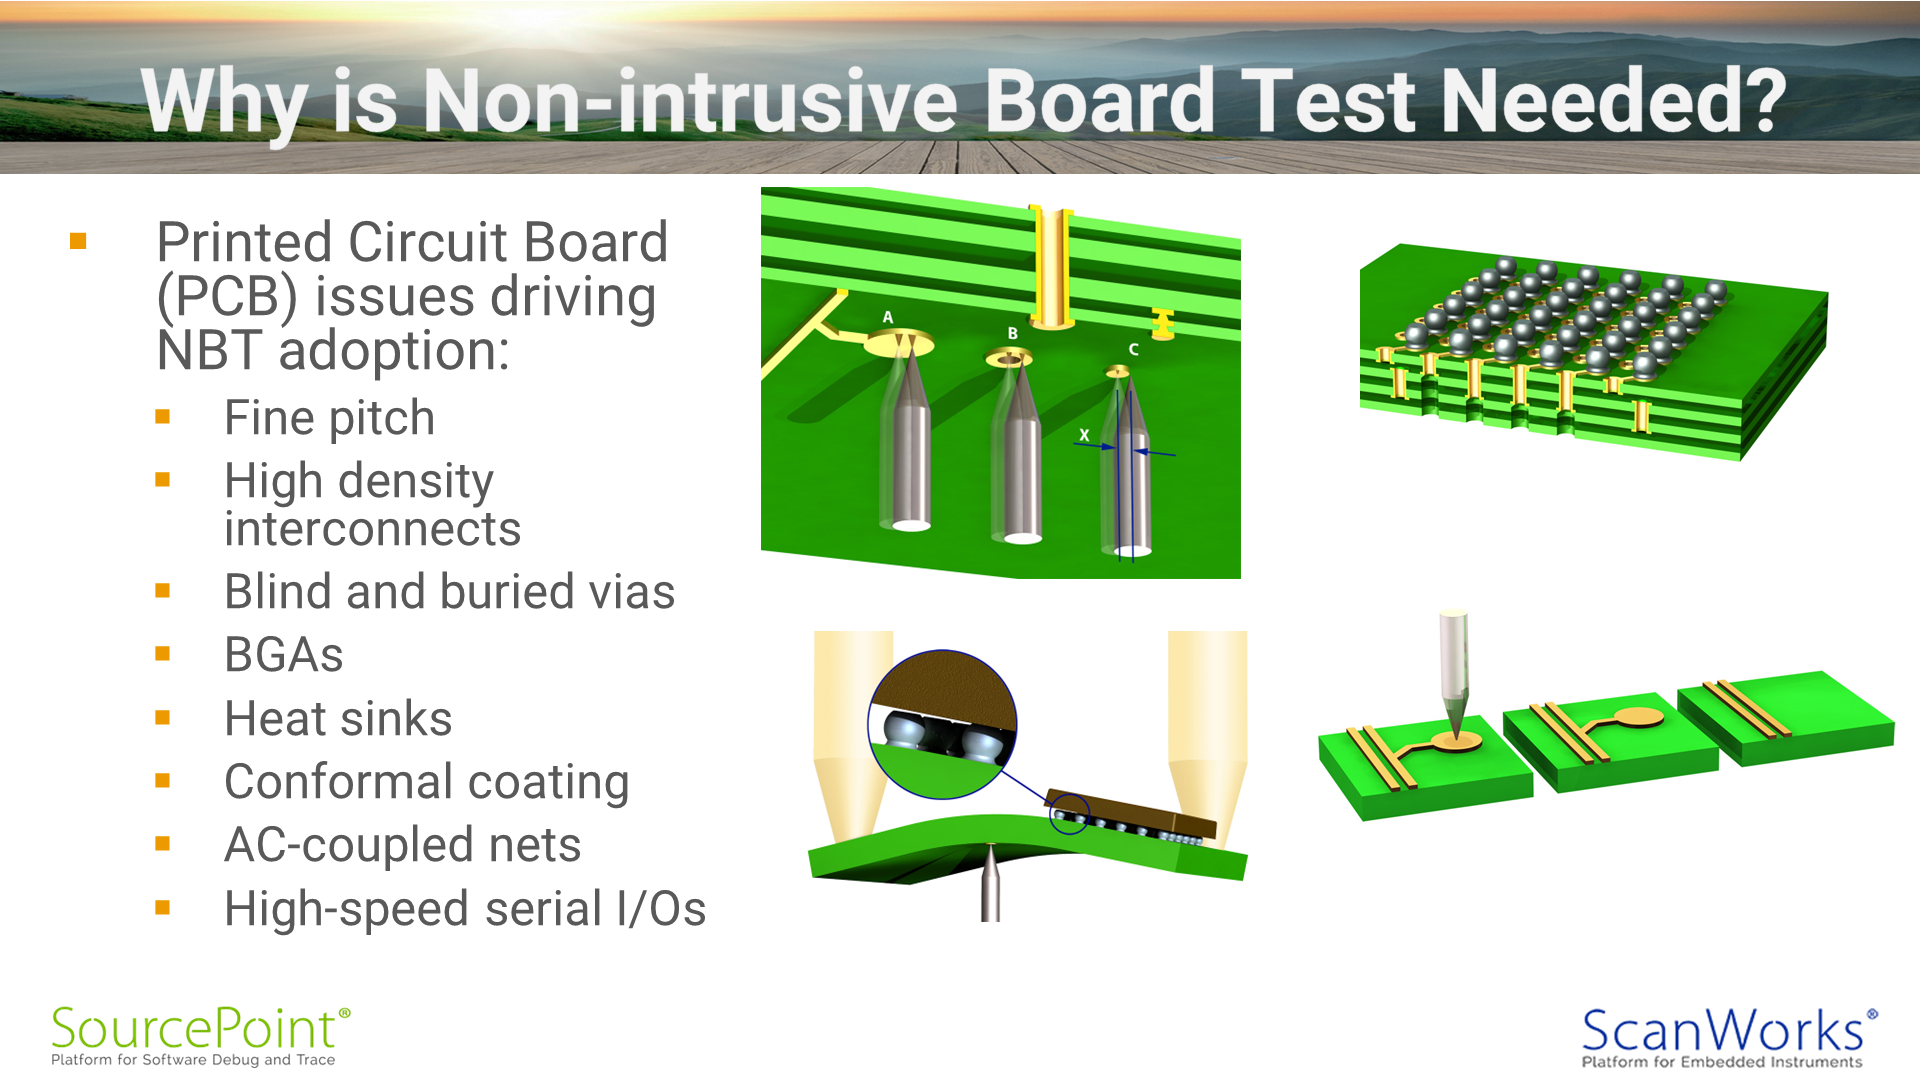 Why is Non-intrusive Board Test Needed